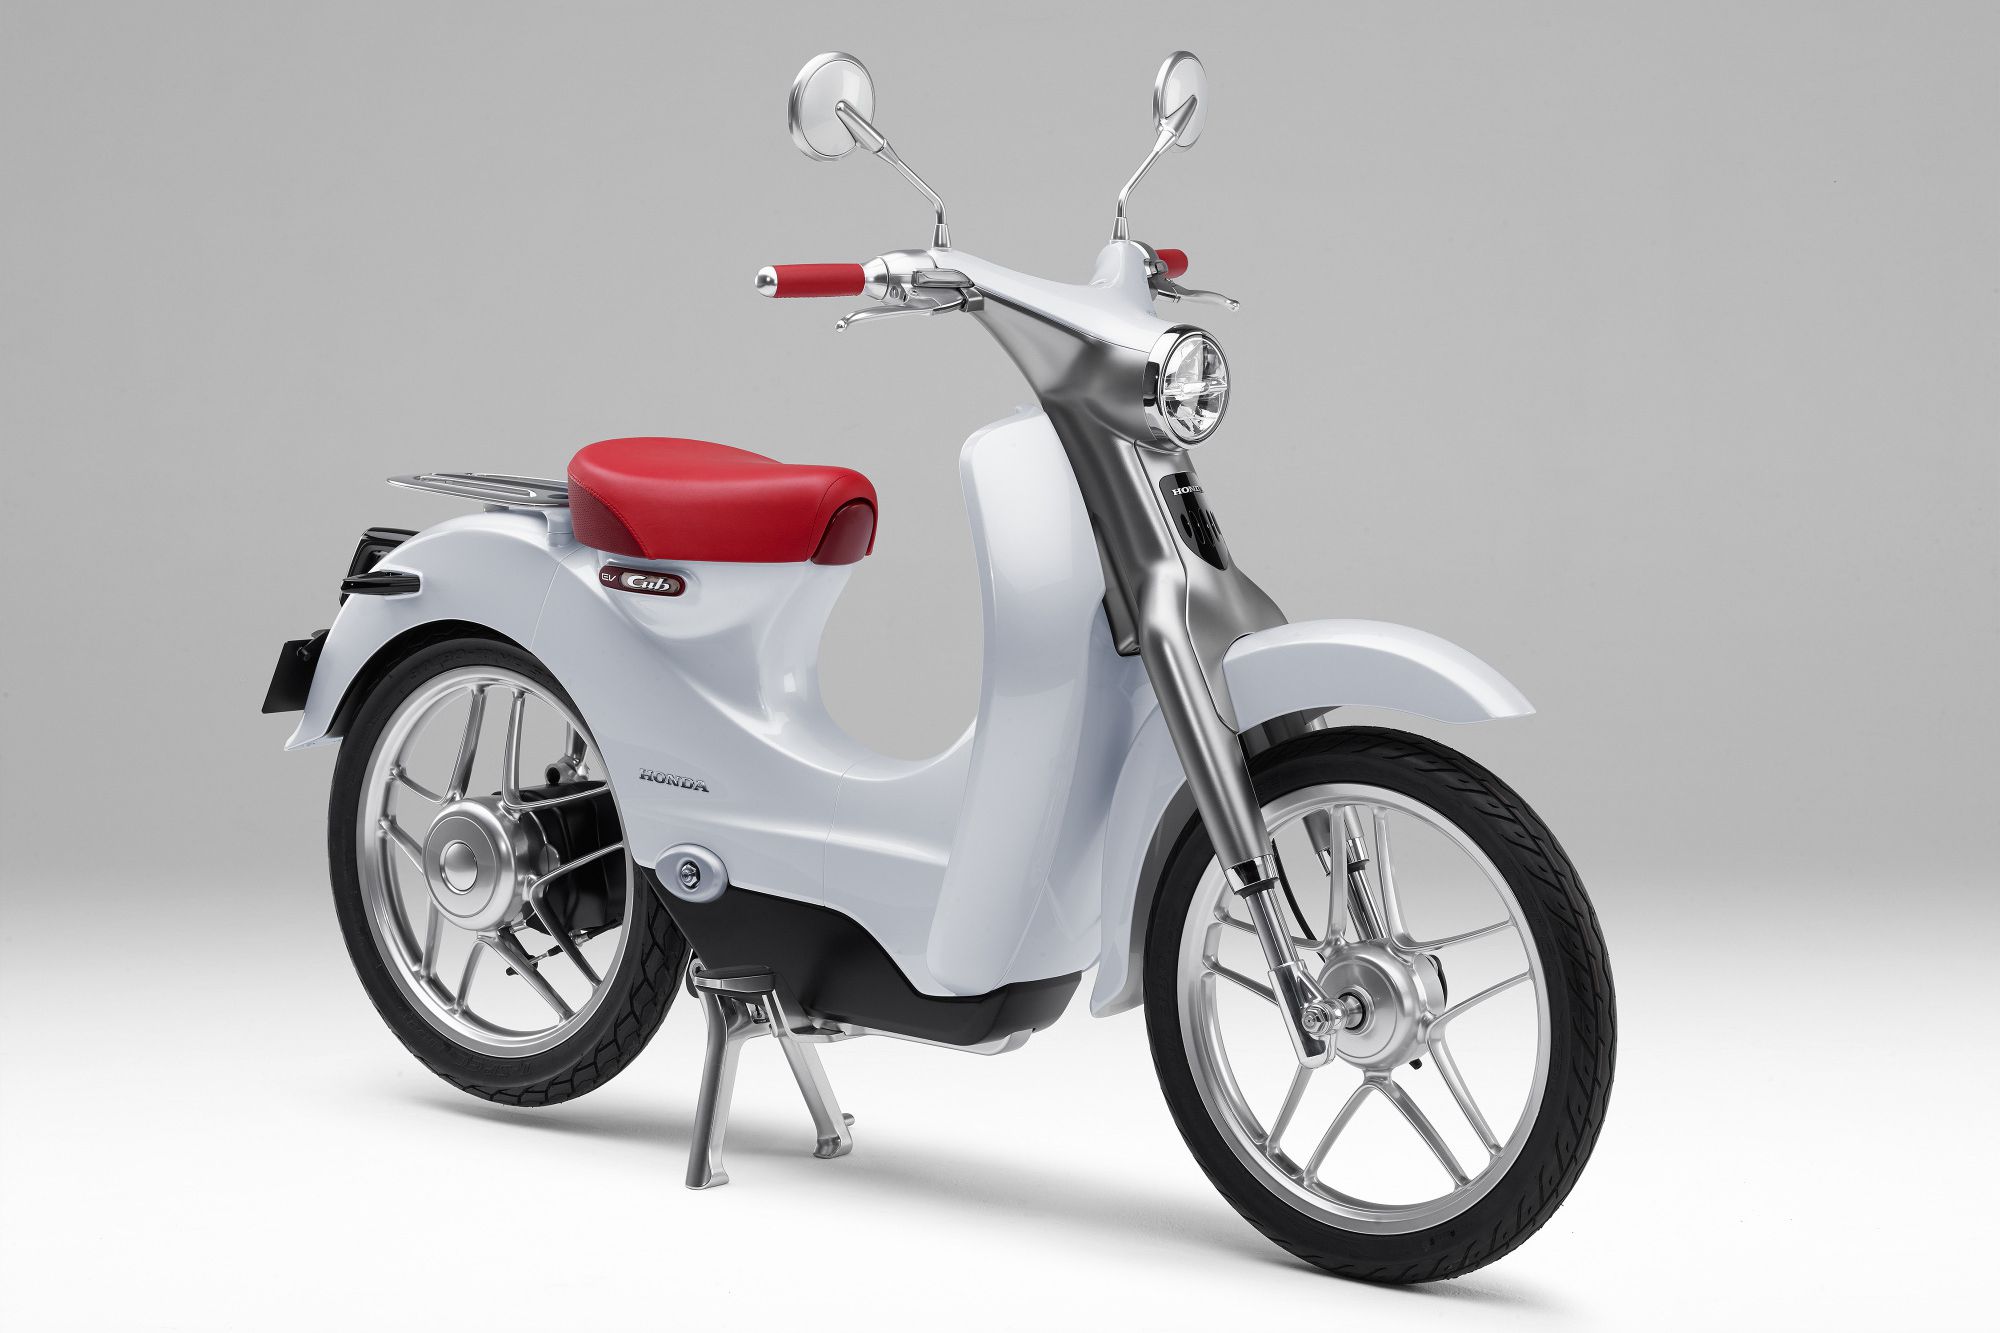 Honda to produce EV-CUB in two years